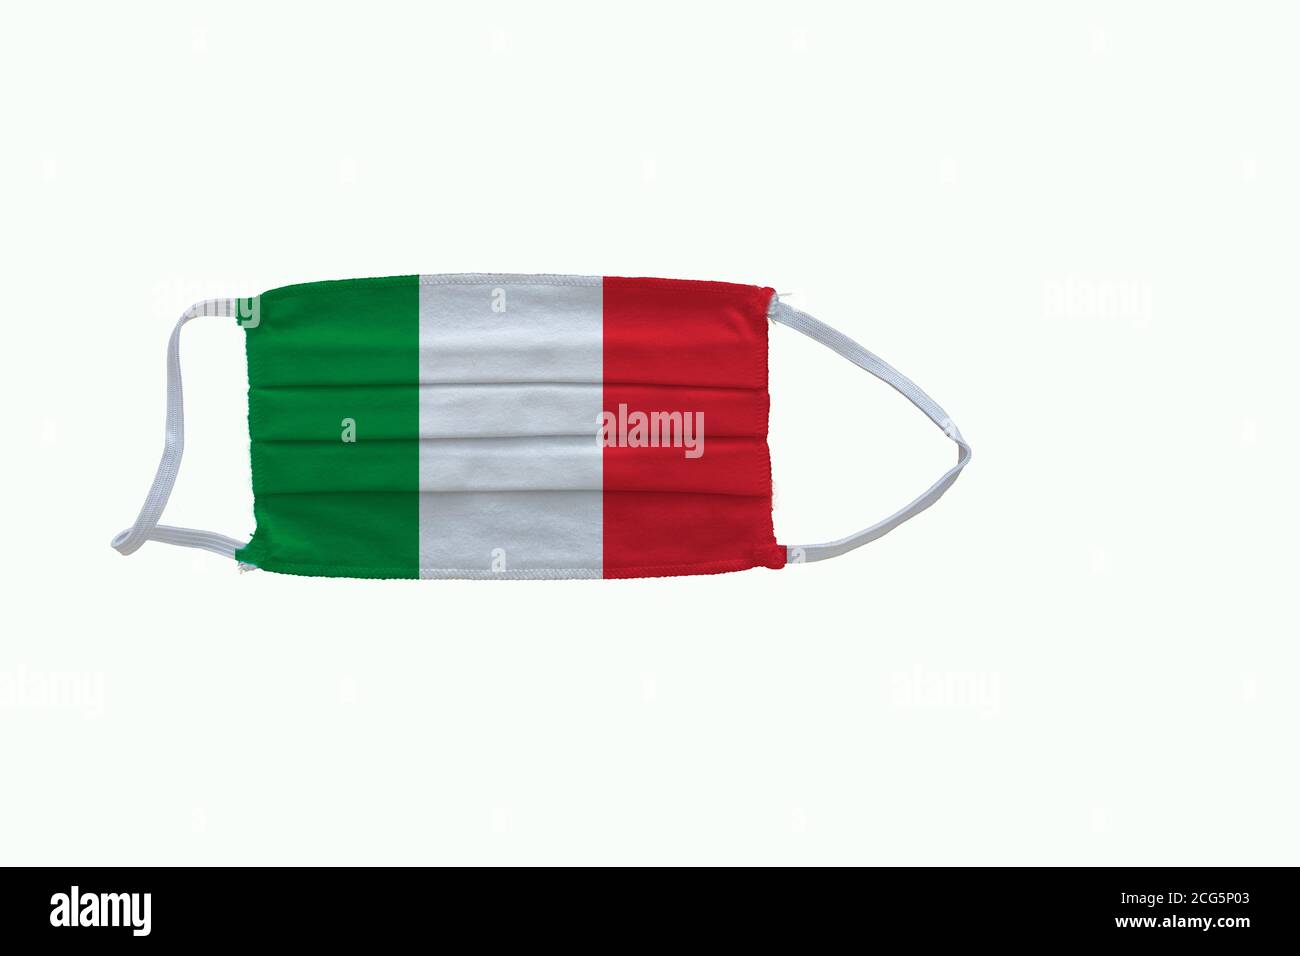 Italian flag design Covid-19 pandemic  virus face mask  on a white background with copy space Stock Photo